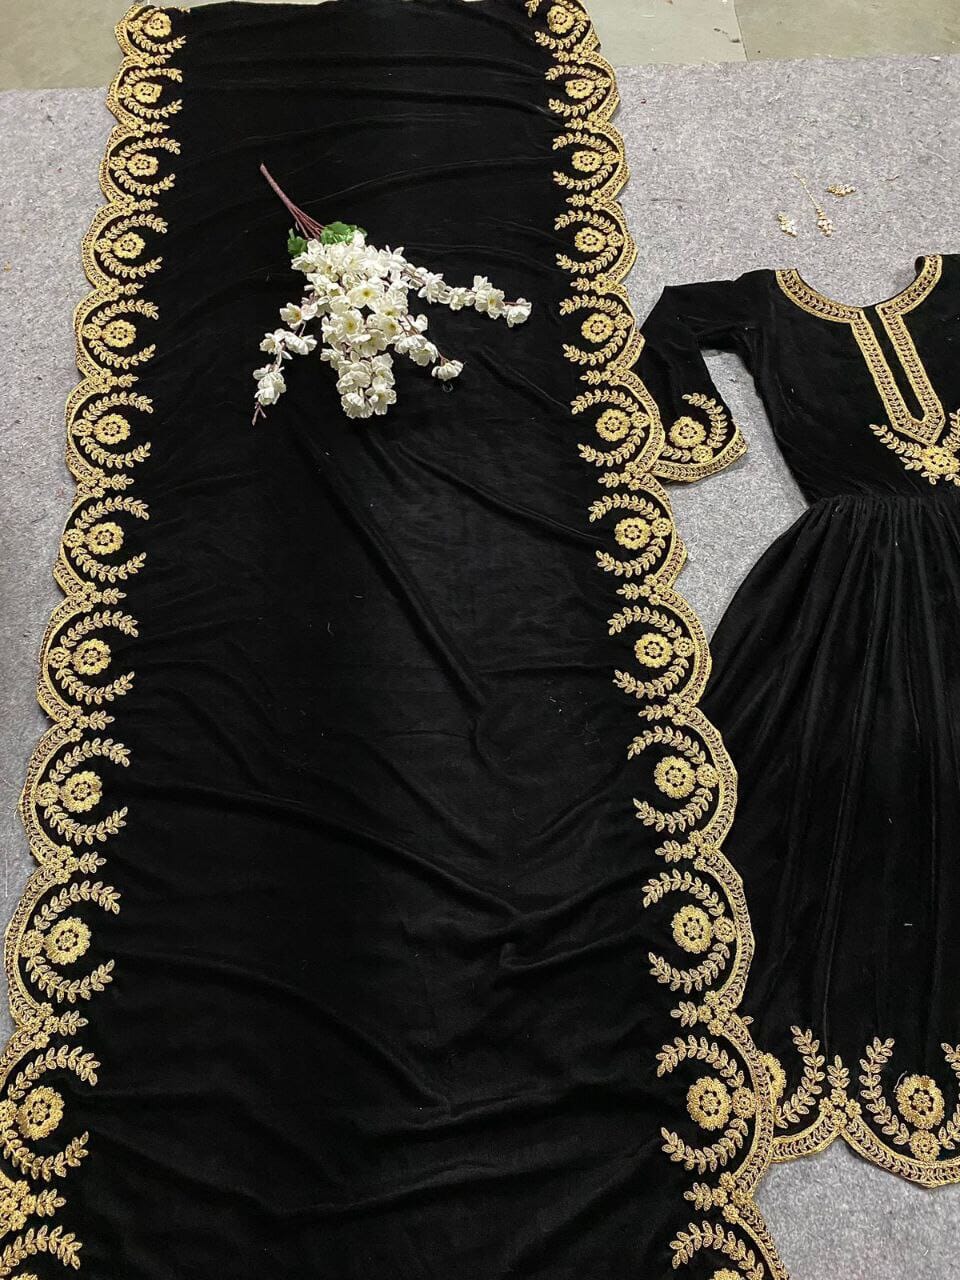 MF 198 Heavy Viscose Velvet With Heavy Embroidery Work Anarkali Gown Suit Designer Suits shopindi.sg 